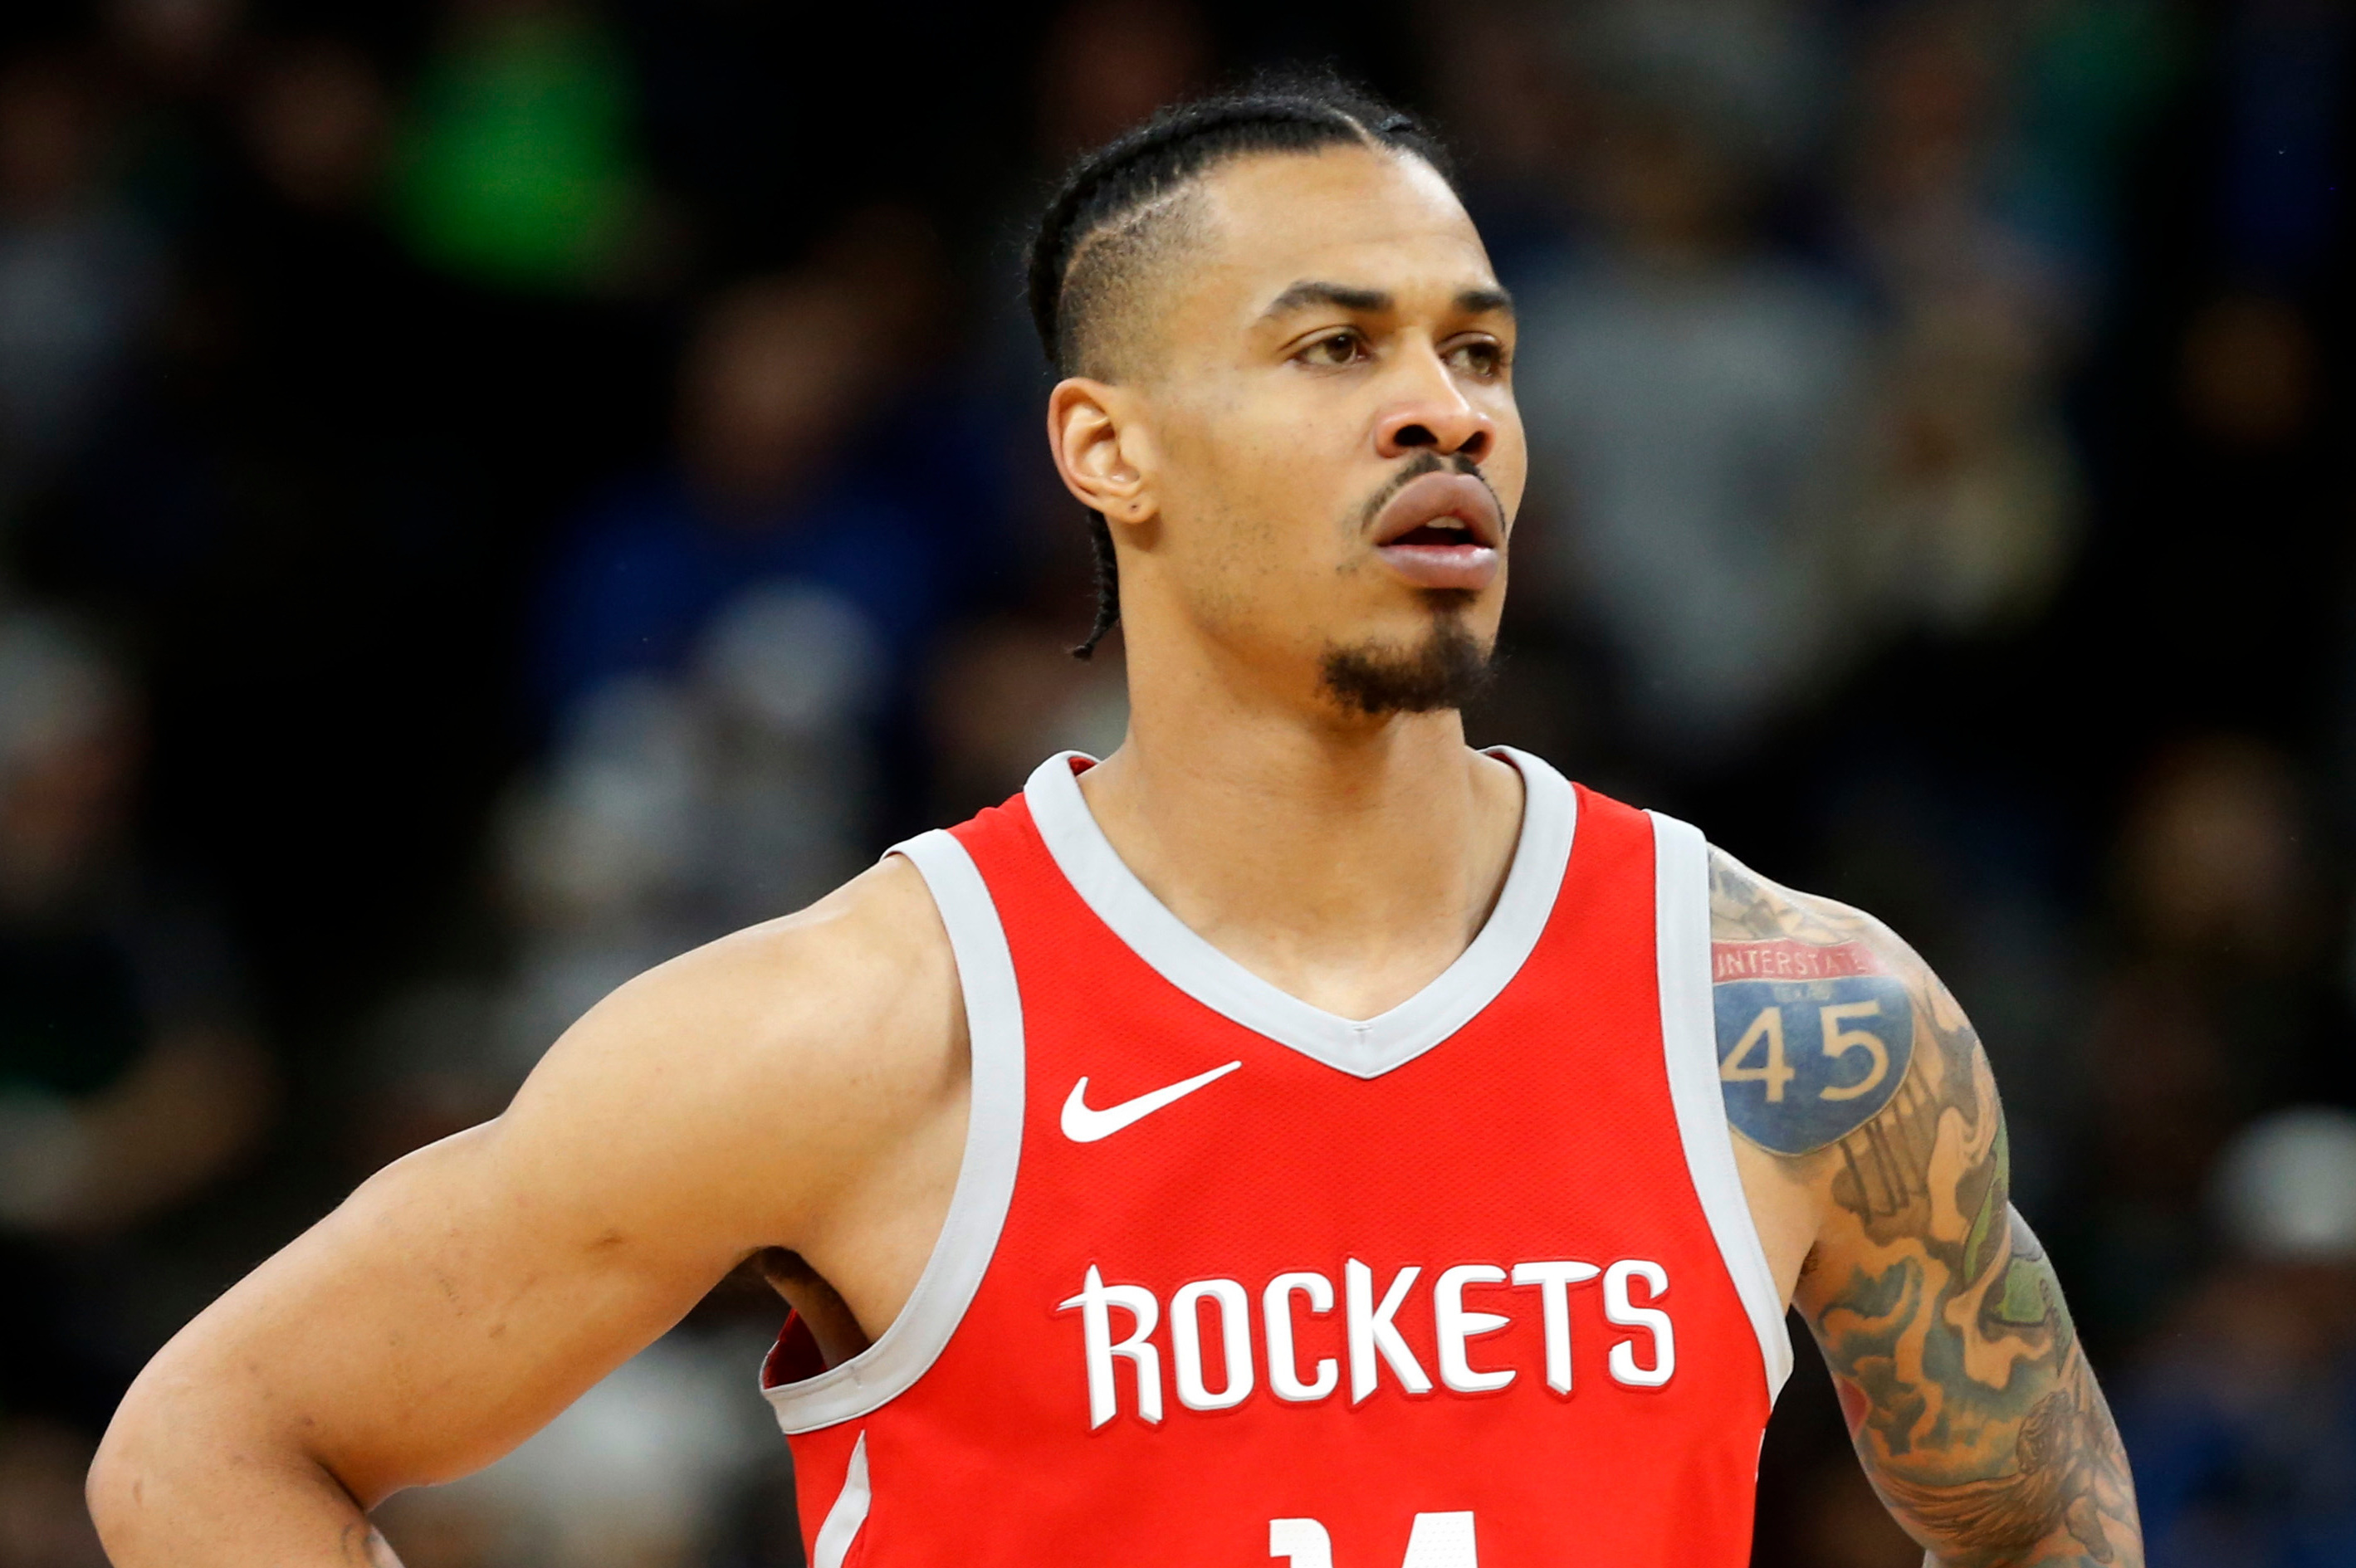 NBA Buzz - Gerald Green is rocking the Rockets logo in his